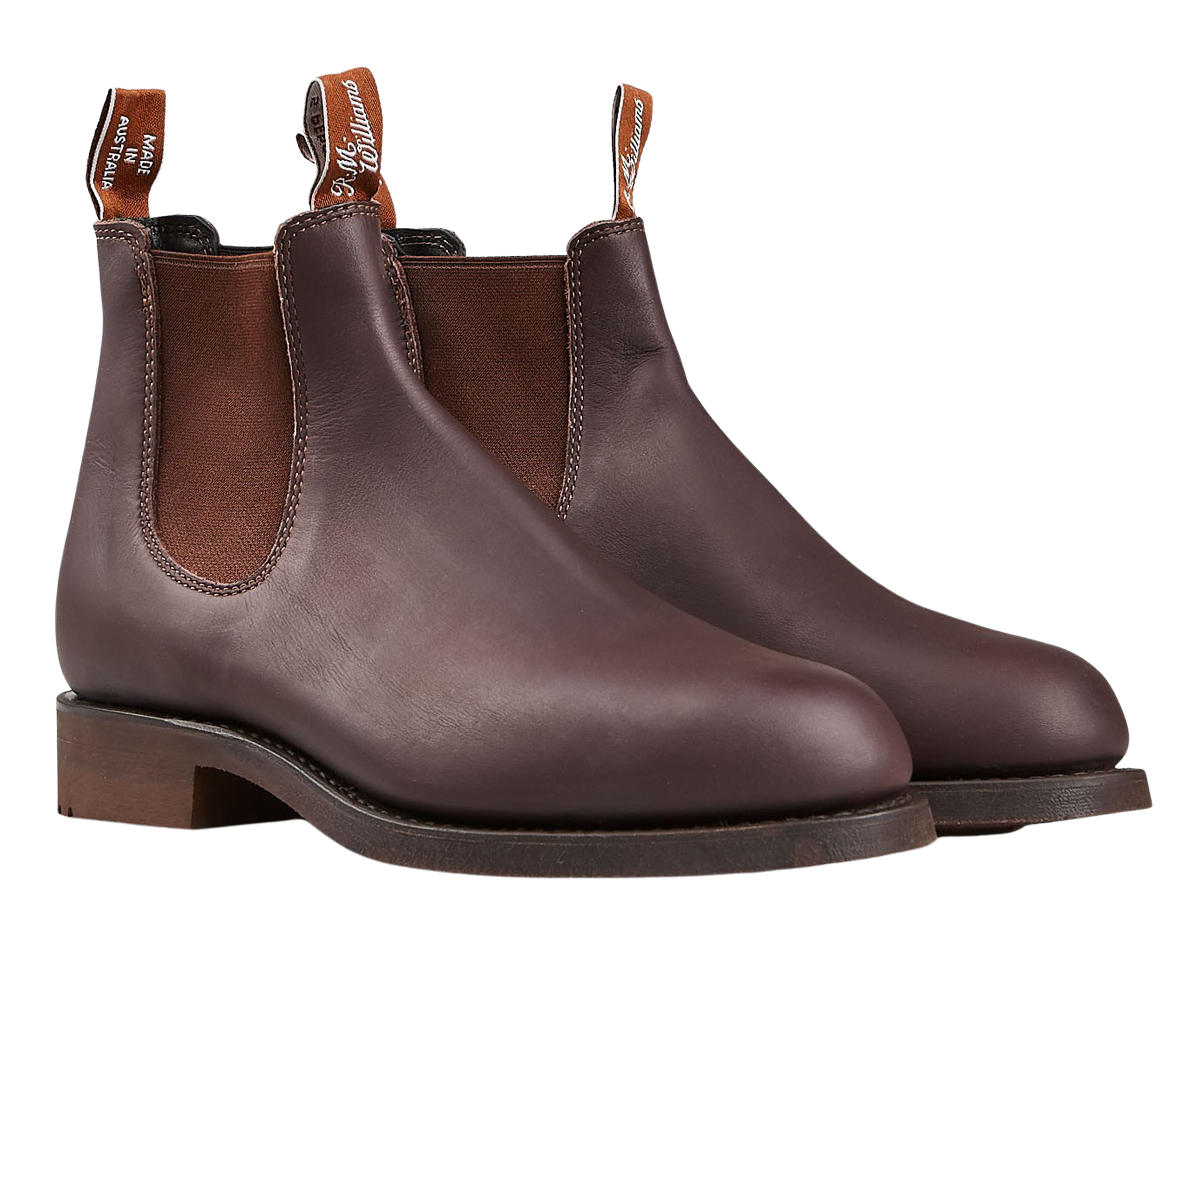 RM Williams - Shop Premium Boots & Apparel by RM Williams Online